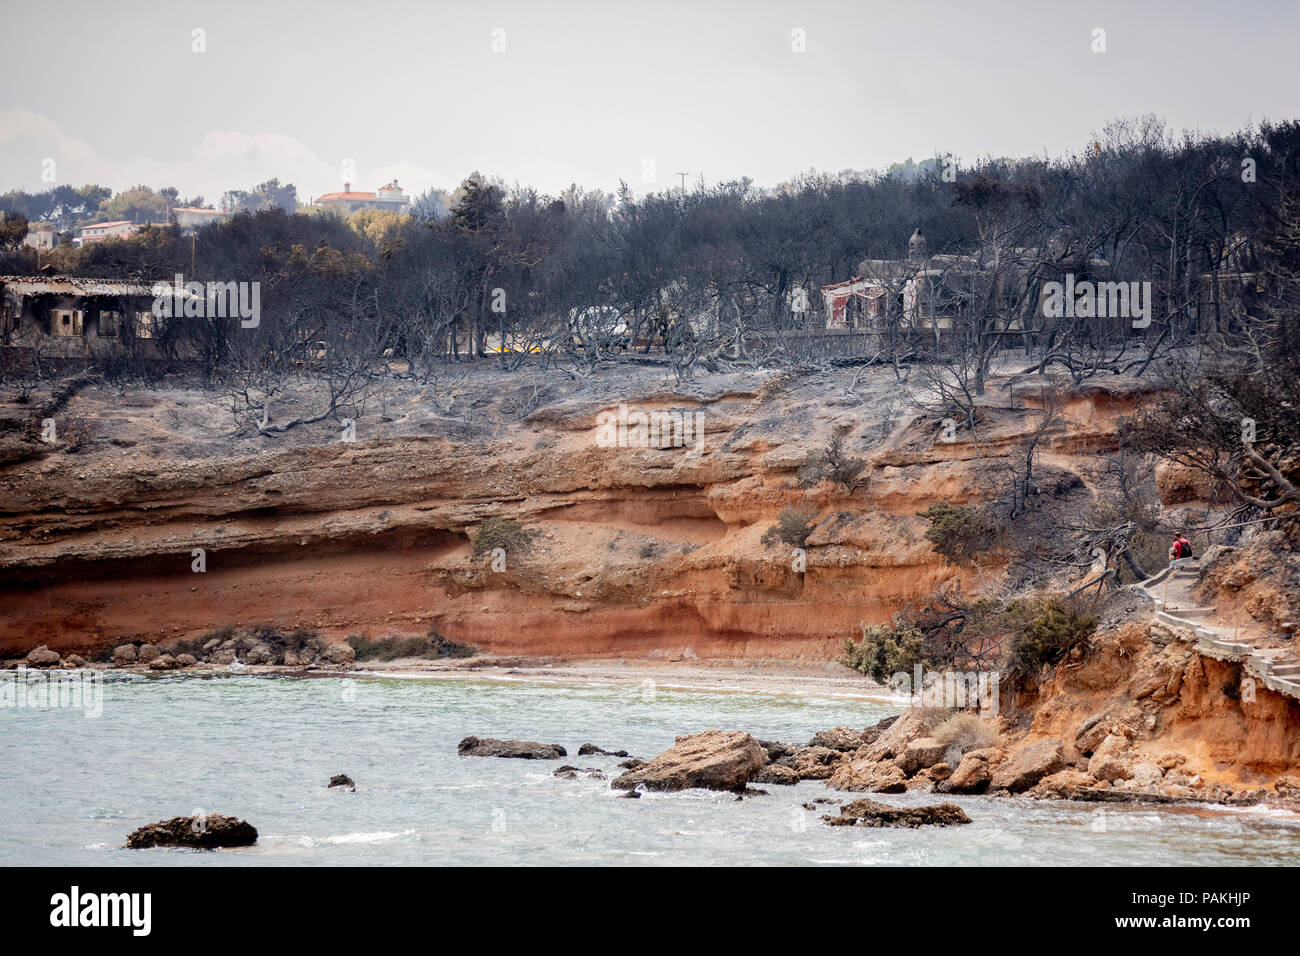 Mati, Greece. 24th July, 2018. A fire destroyed the coast after a fire  raged there last night. According to new information, the out-of-control  forest fires near Athens killed several people on 24